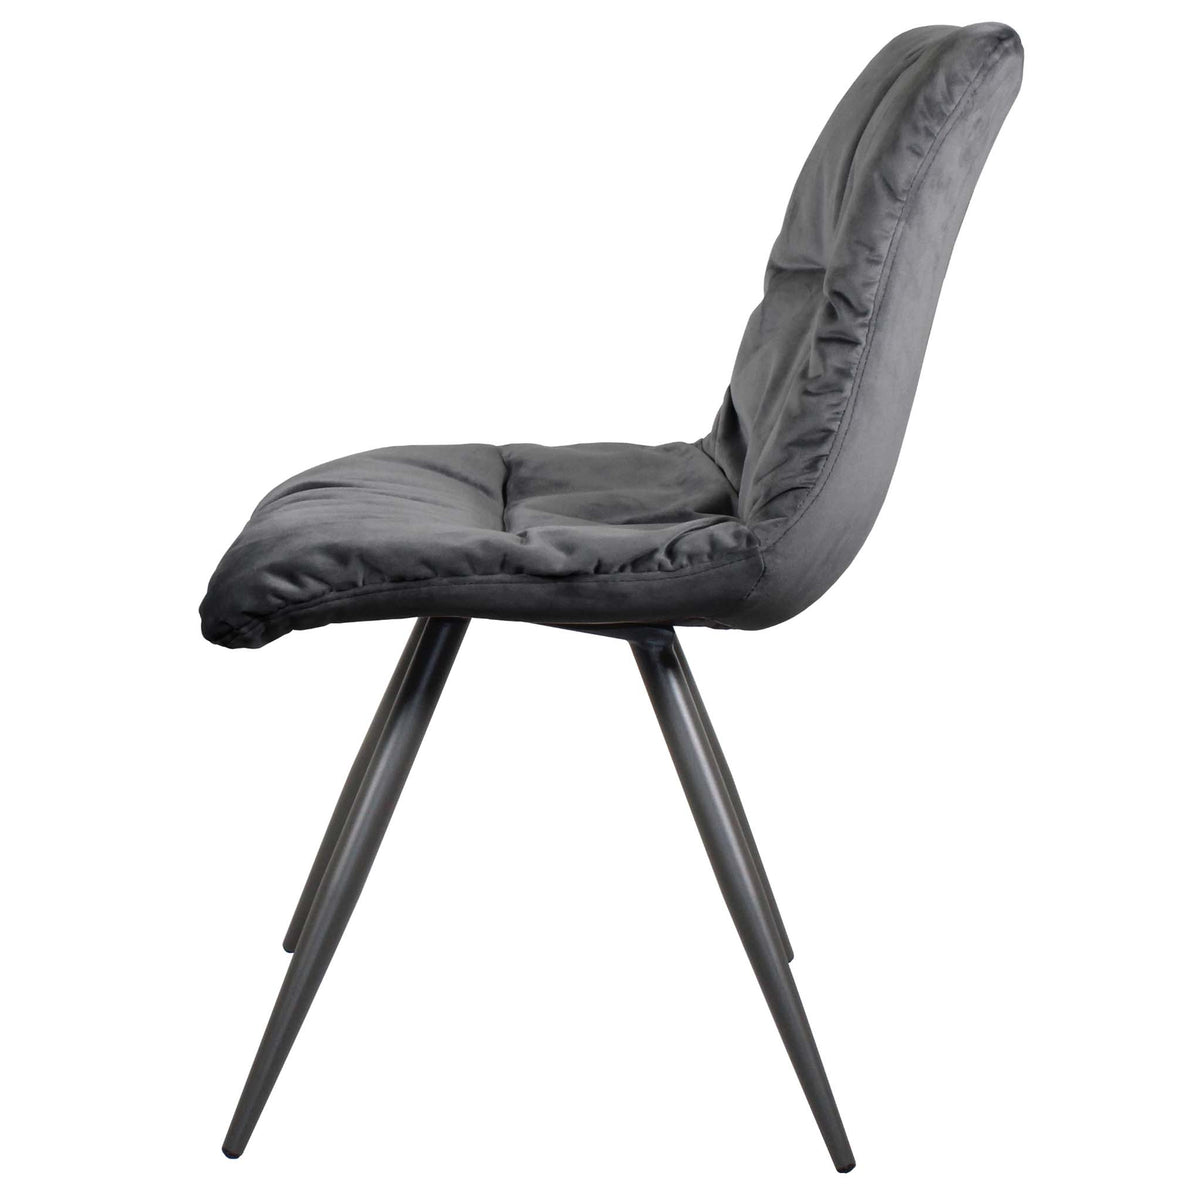 Side view of the Dark Grey Addison Velvet Chair from Roseland Furniture